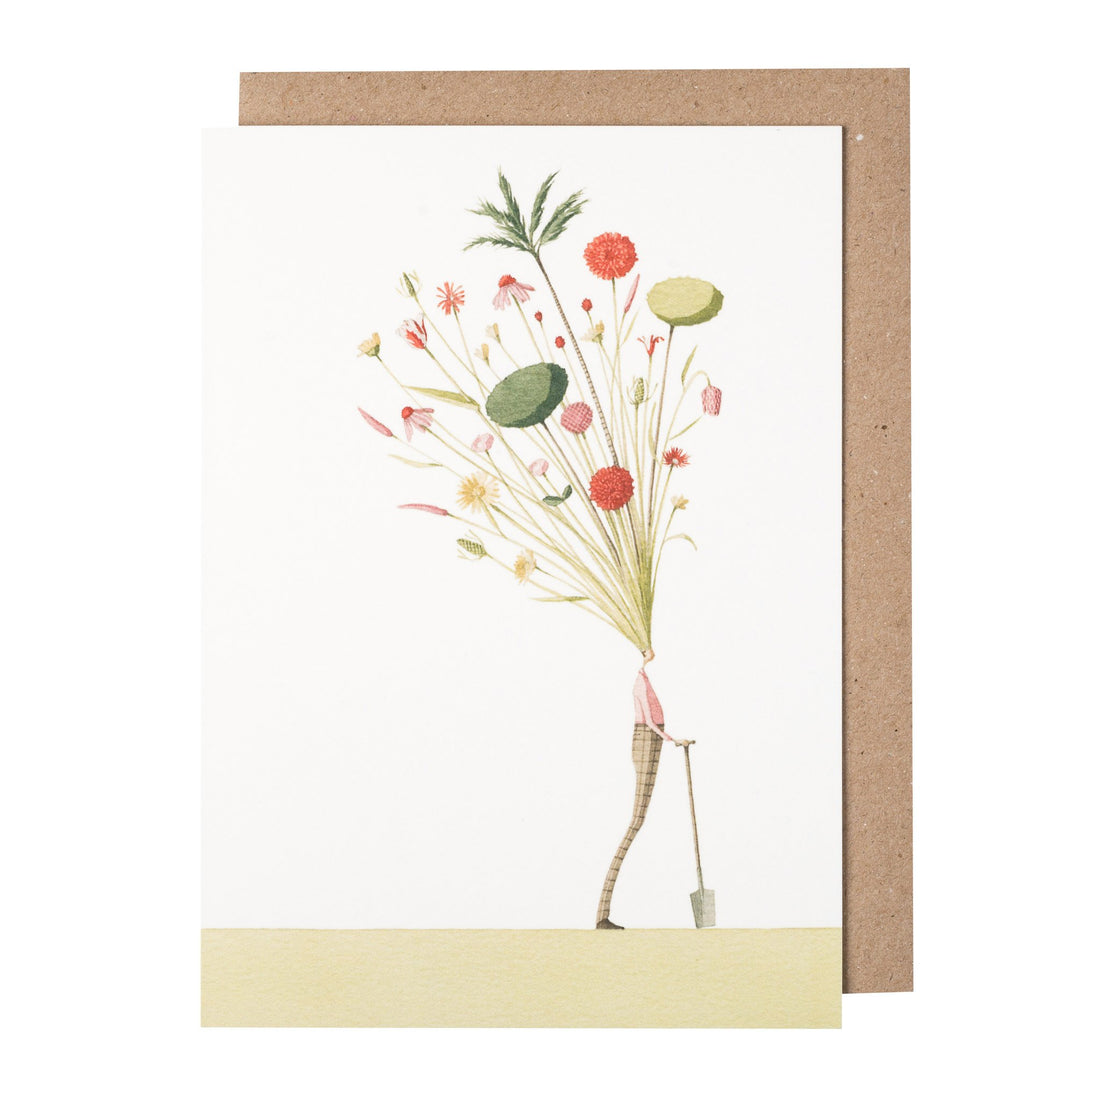 An environmentally sustainable Seed Head Card featuring an illustration of a man carrying a bouquet of flowers on Hester &amp; Cook artwork paper.